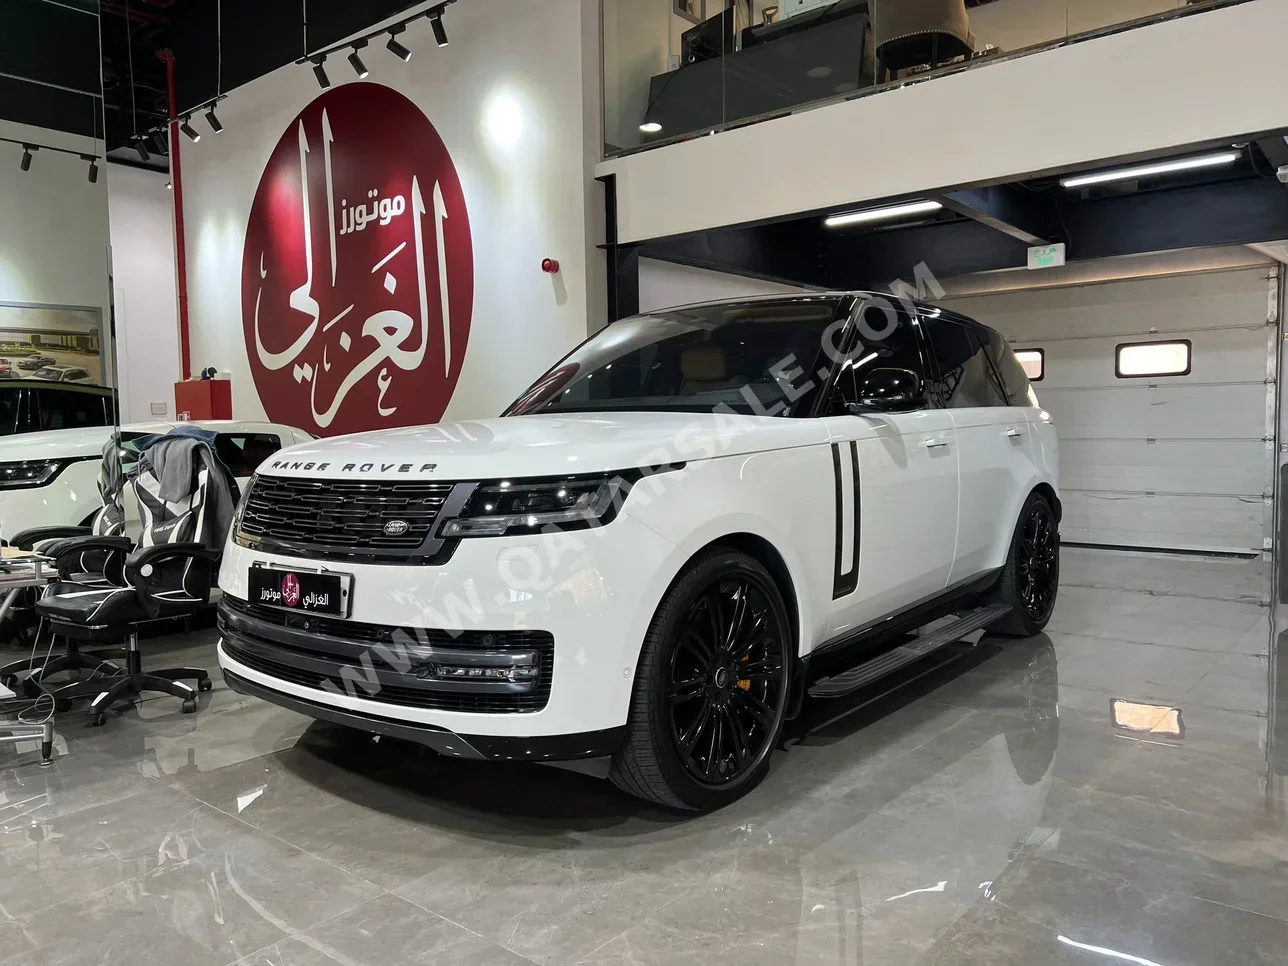  Land Rover  Range Rover  Vogue  Autobiography  2023  Automatic  32,000 Km  8 Cylinder  Four Wheel Drive (4WD)  SUV  White  With Warranty